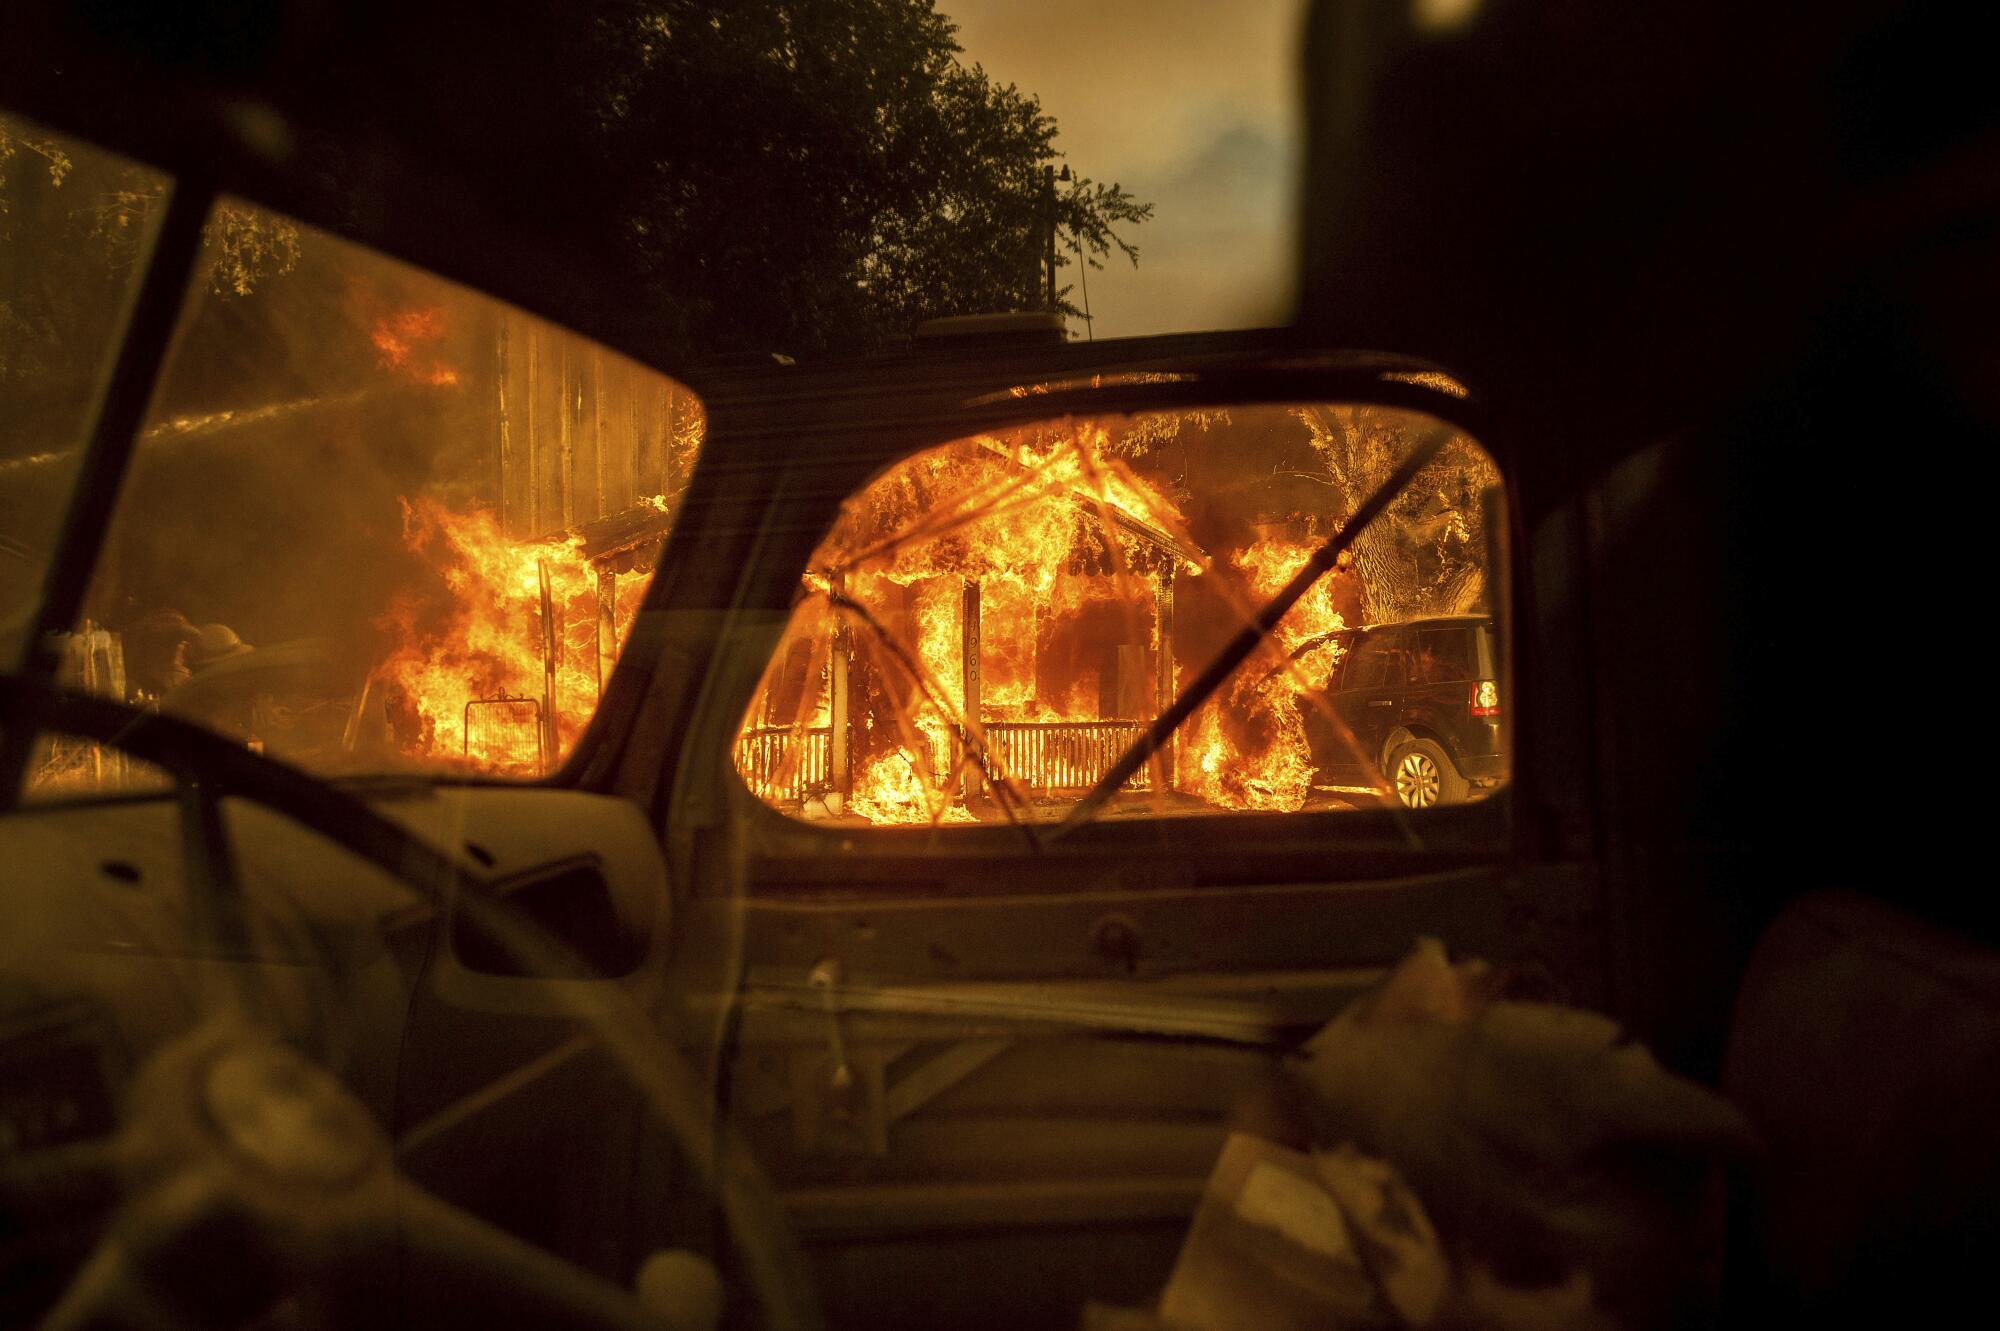 Flames are seen through the window of an automobile.